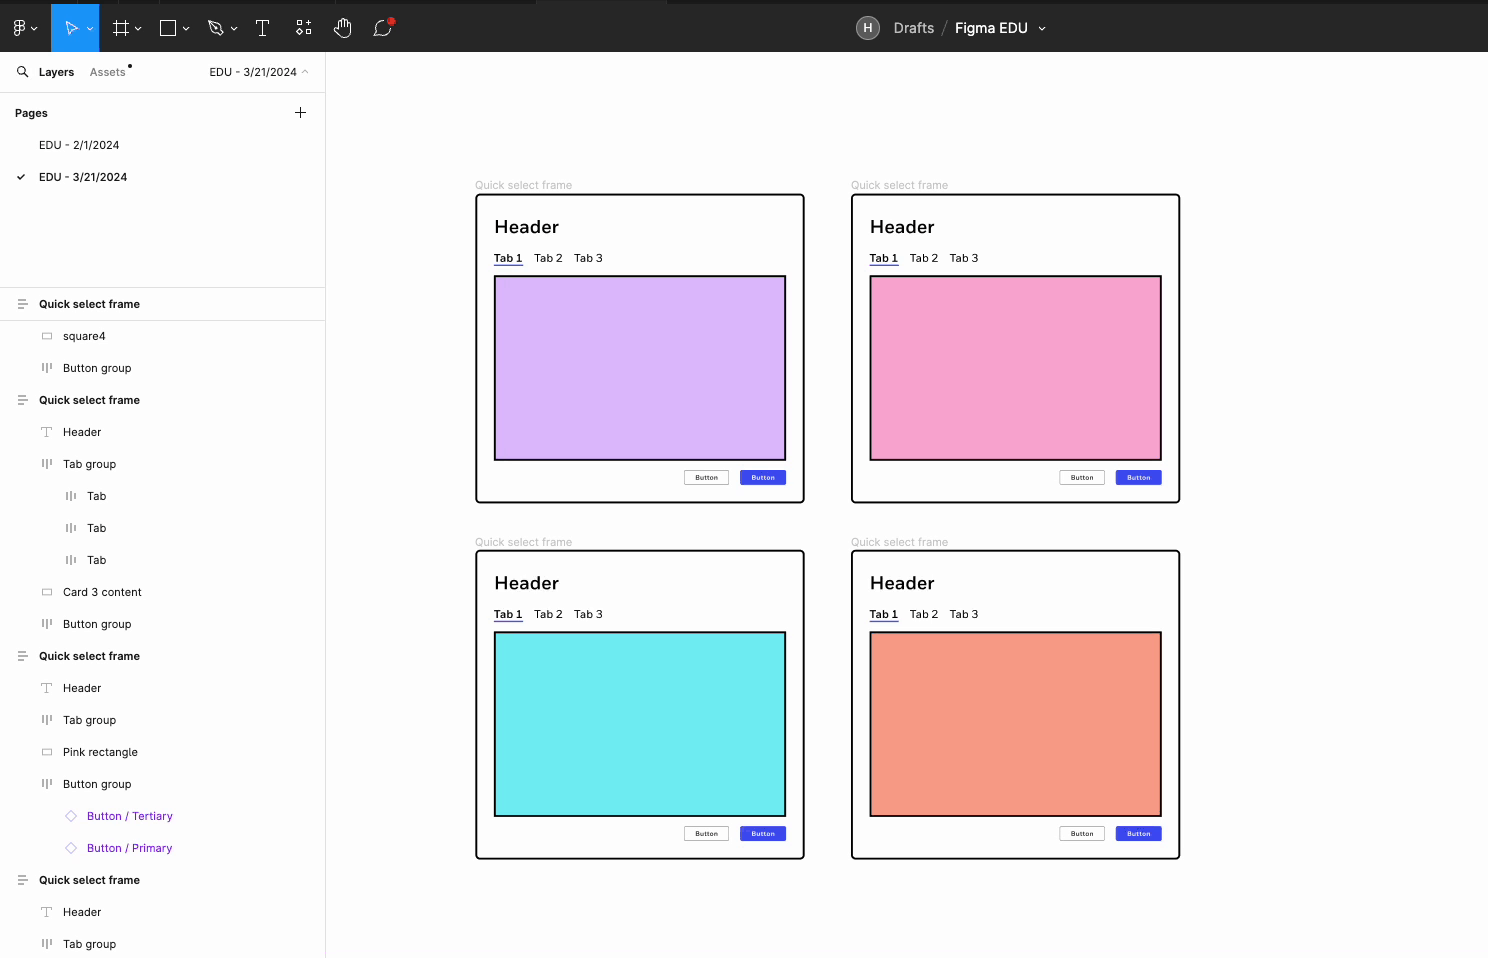 Shows how to select layers in the Figma canvas to right click to pull up the menu to click ‘Rename’, this pulls up the Rename menu to rename the layers that were selected